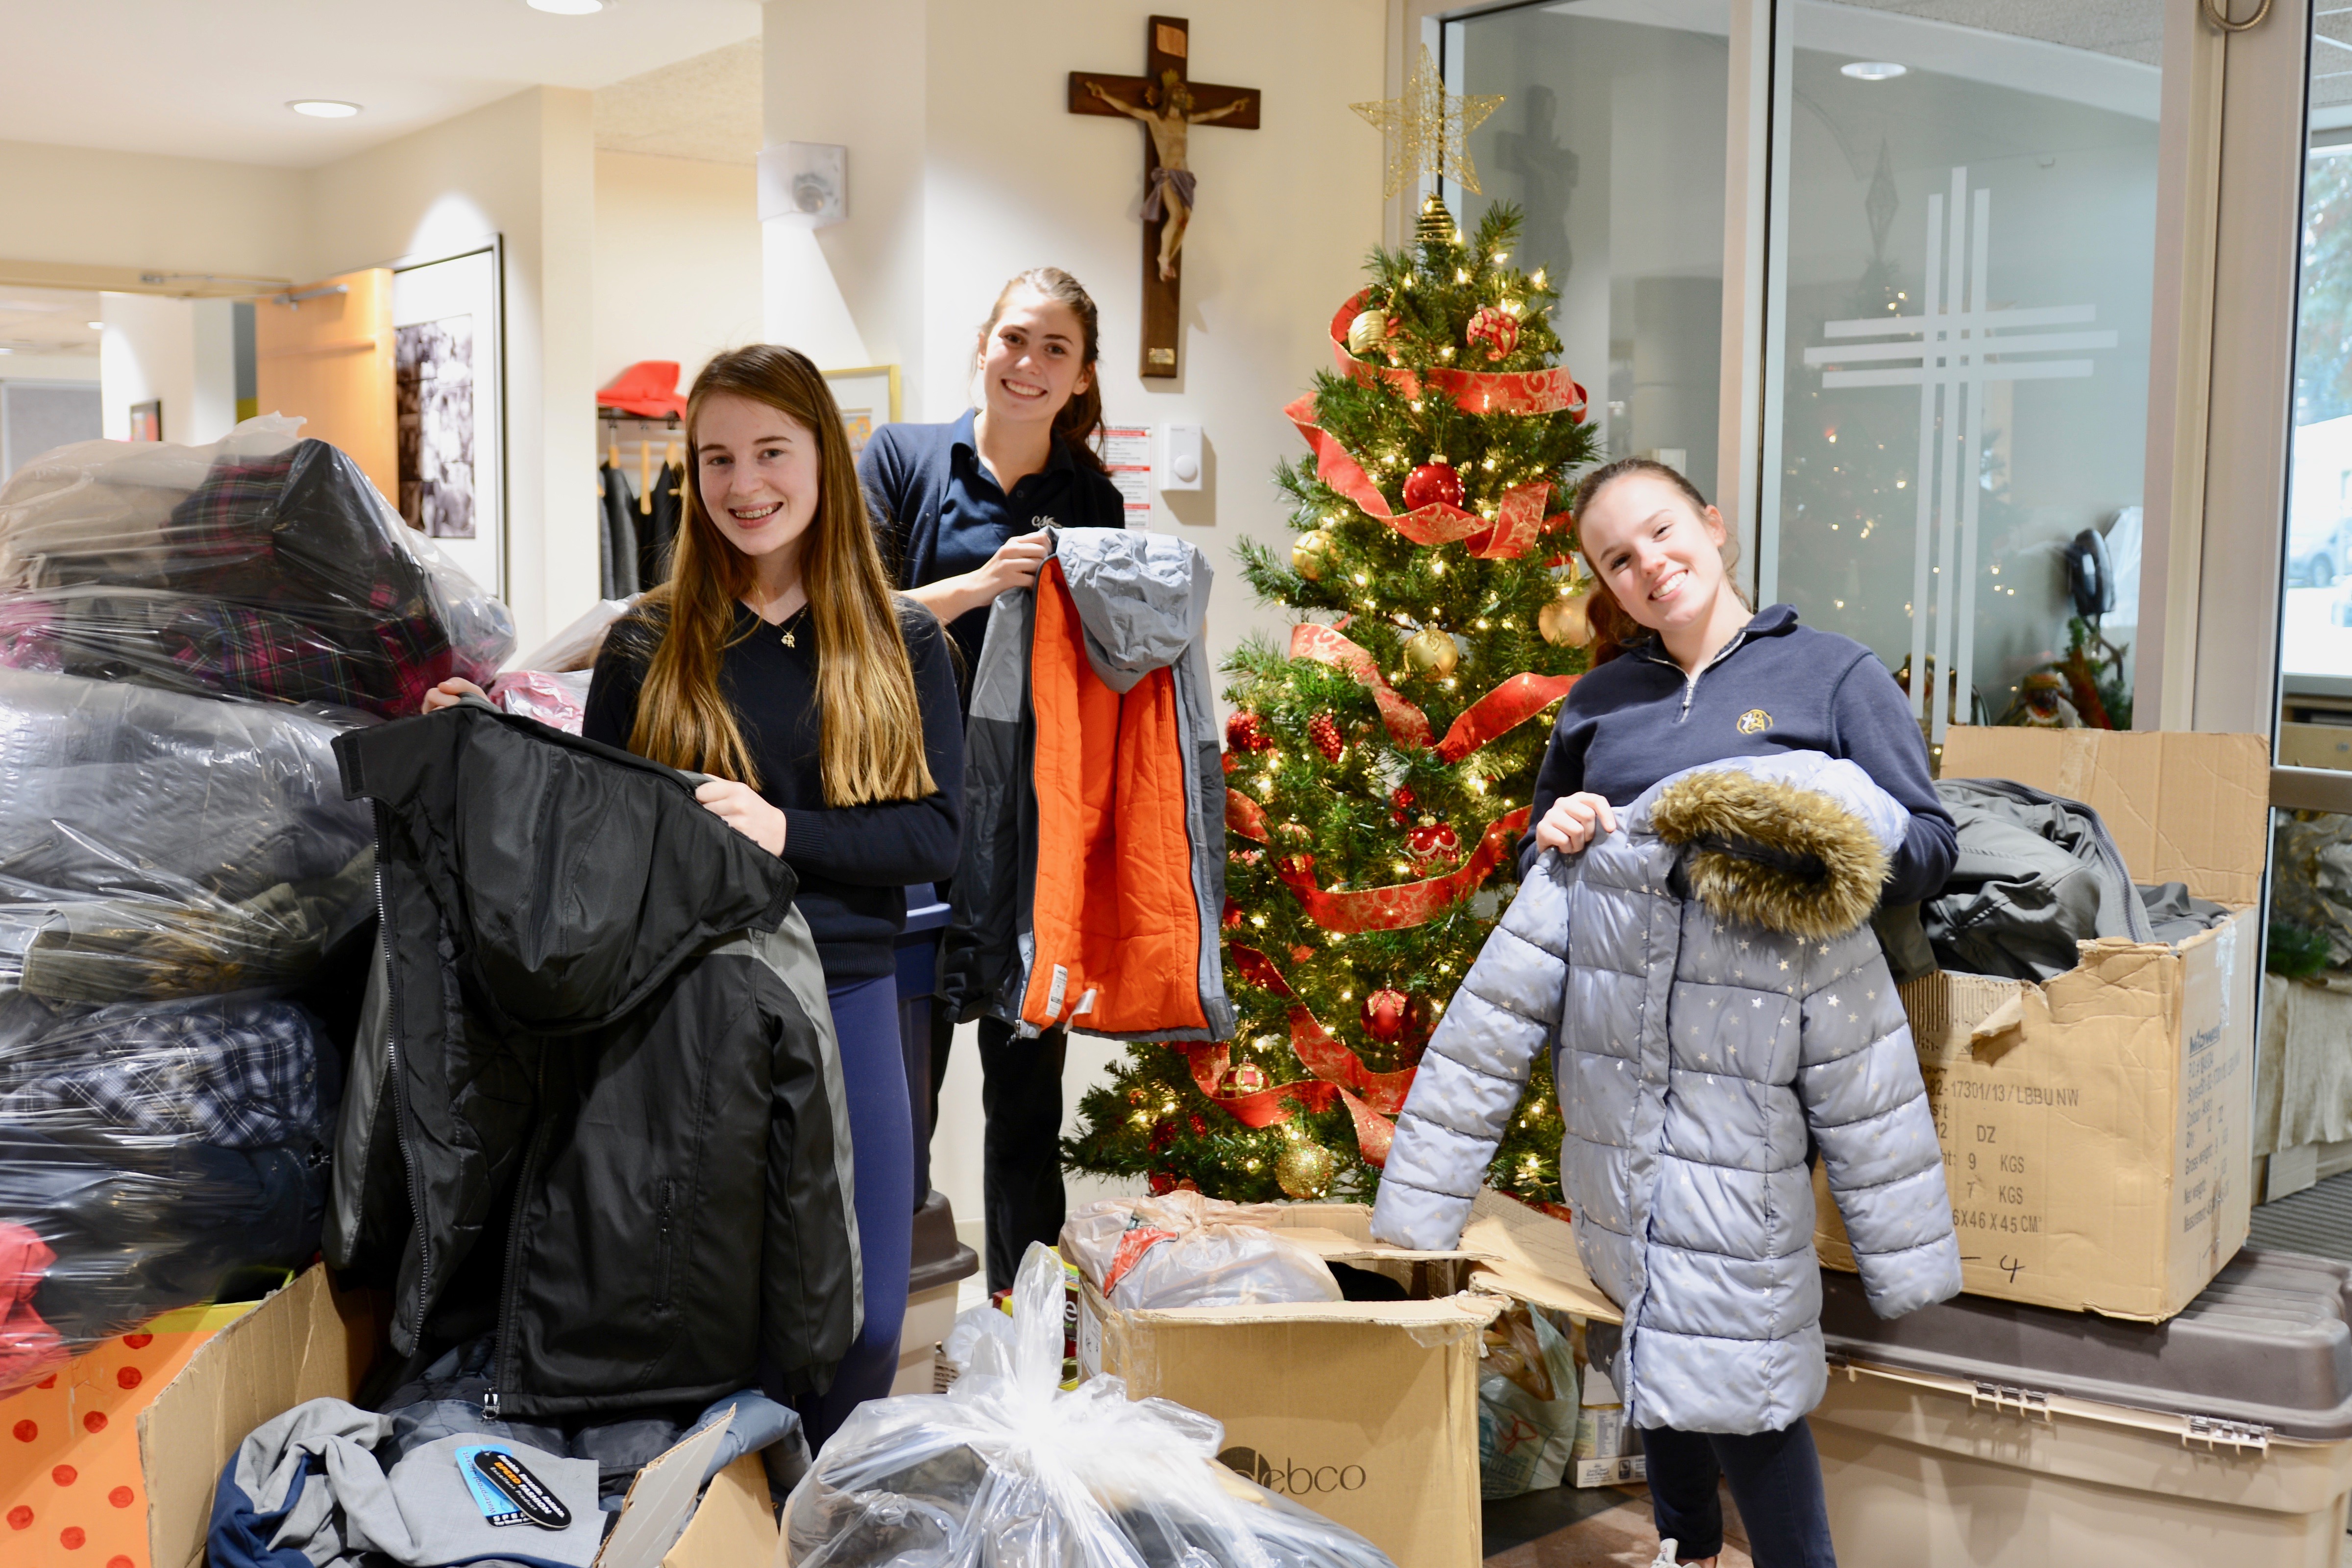 Student Senate members Kira Gouchie and Megan Santi along with fellow student Kendra Brown stand proudly with coat and winter donations. The donations will help families in need this holiday season!